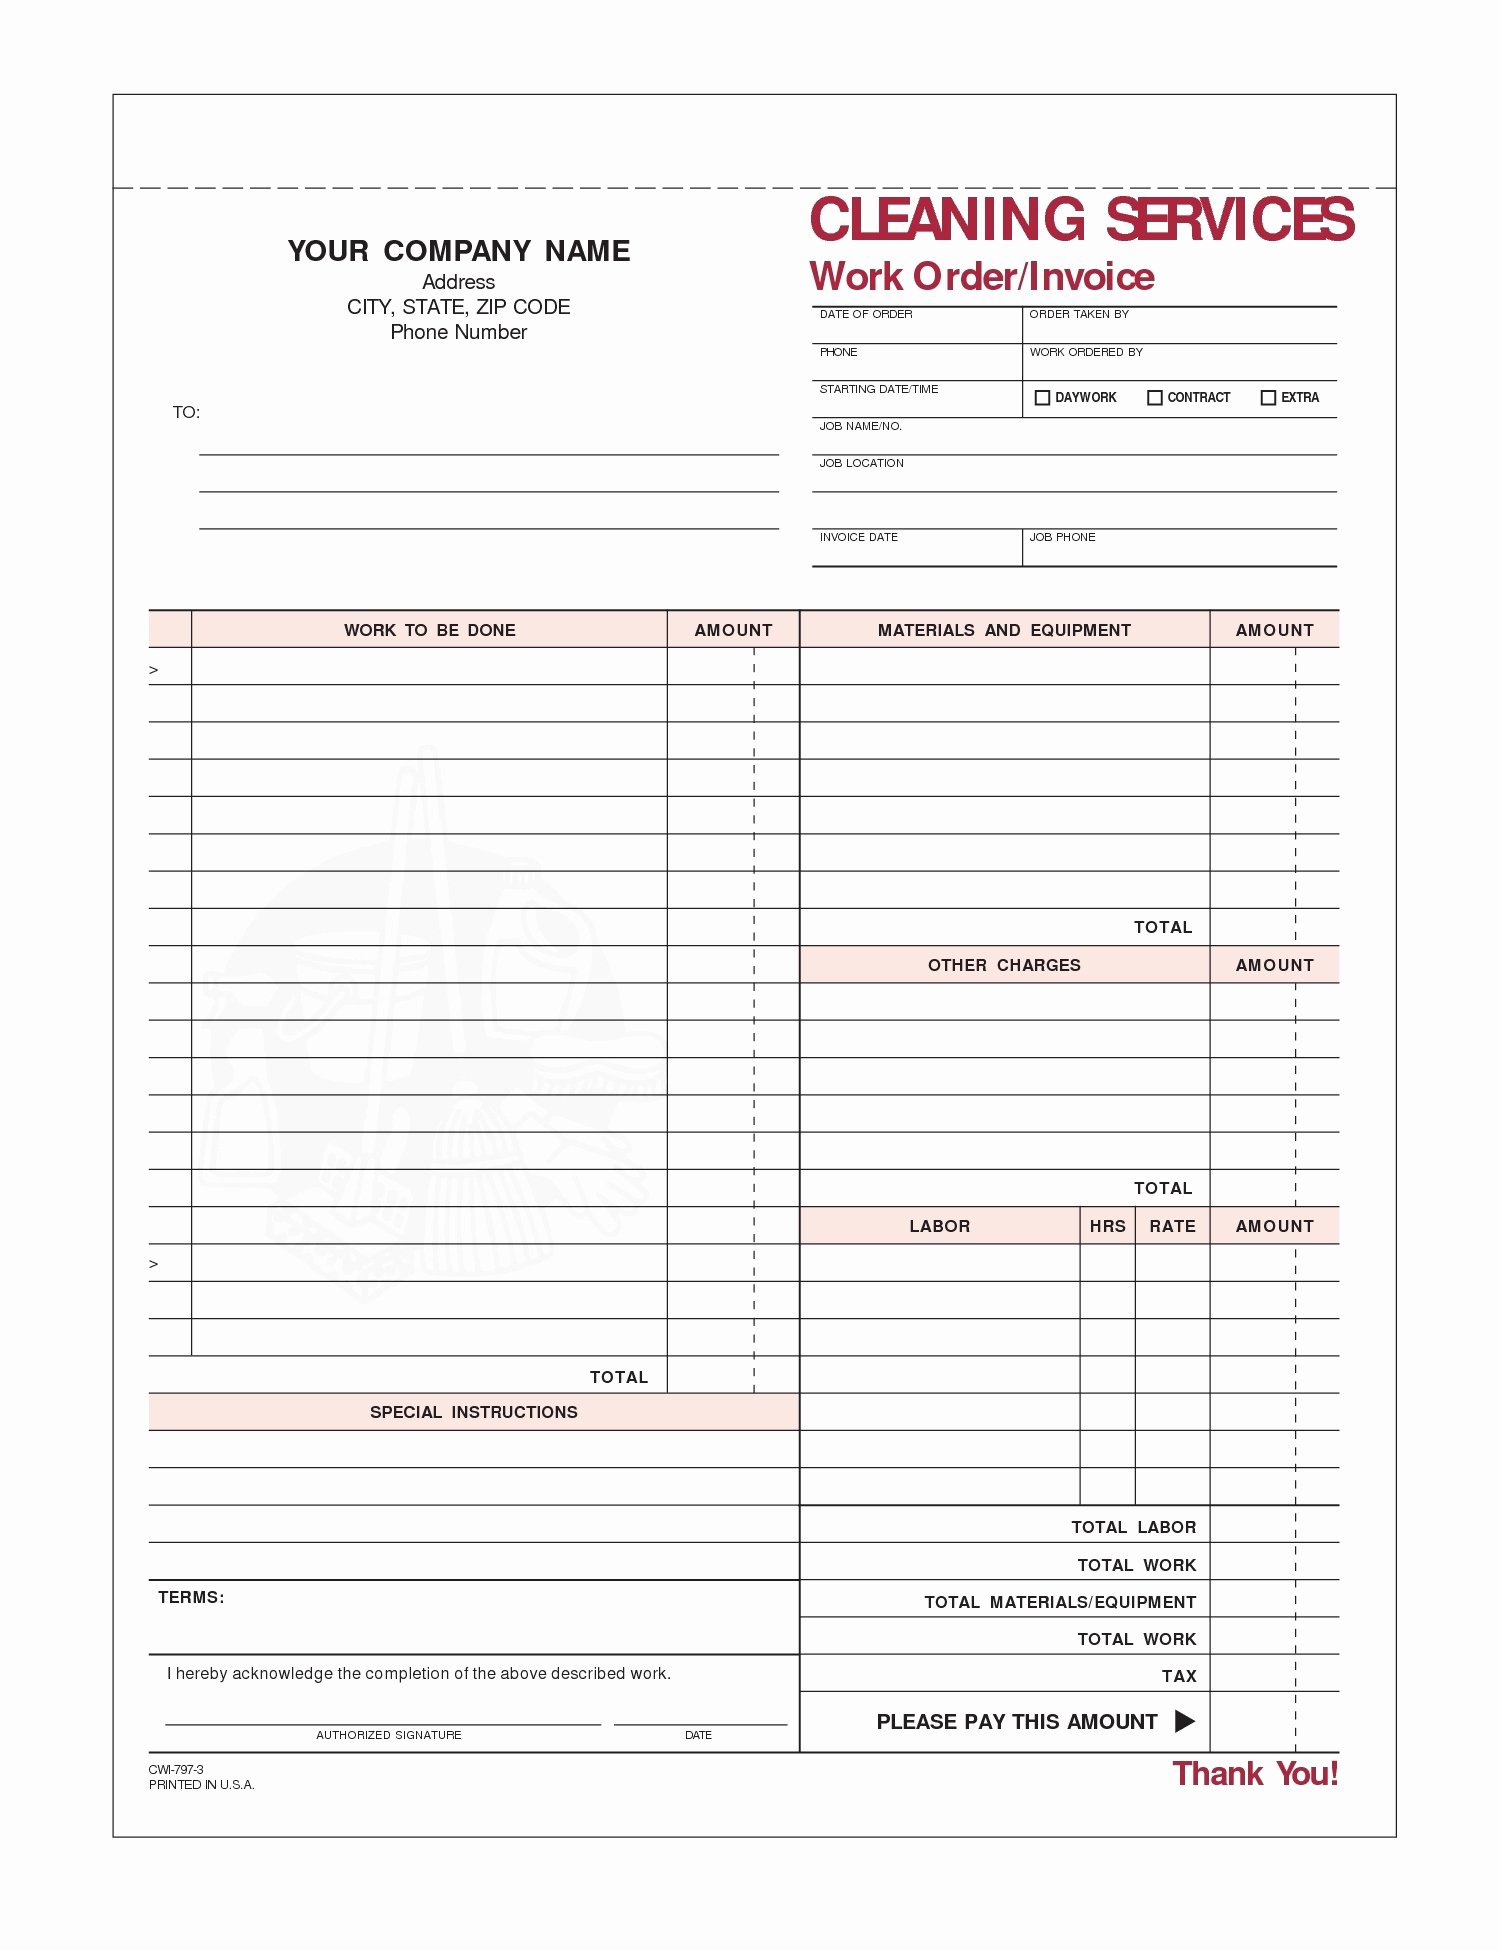 Cleaning Service Template Free Inspirational Cleaning Services Invoice Sample Invoice Template Ideas